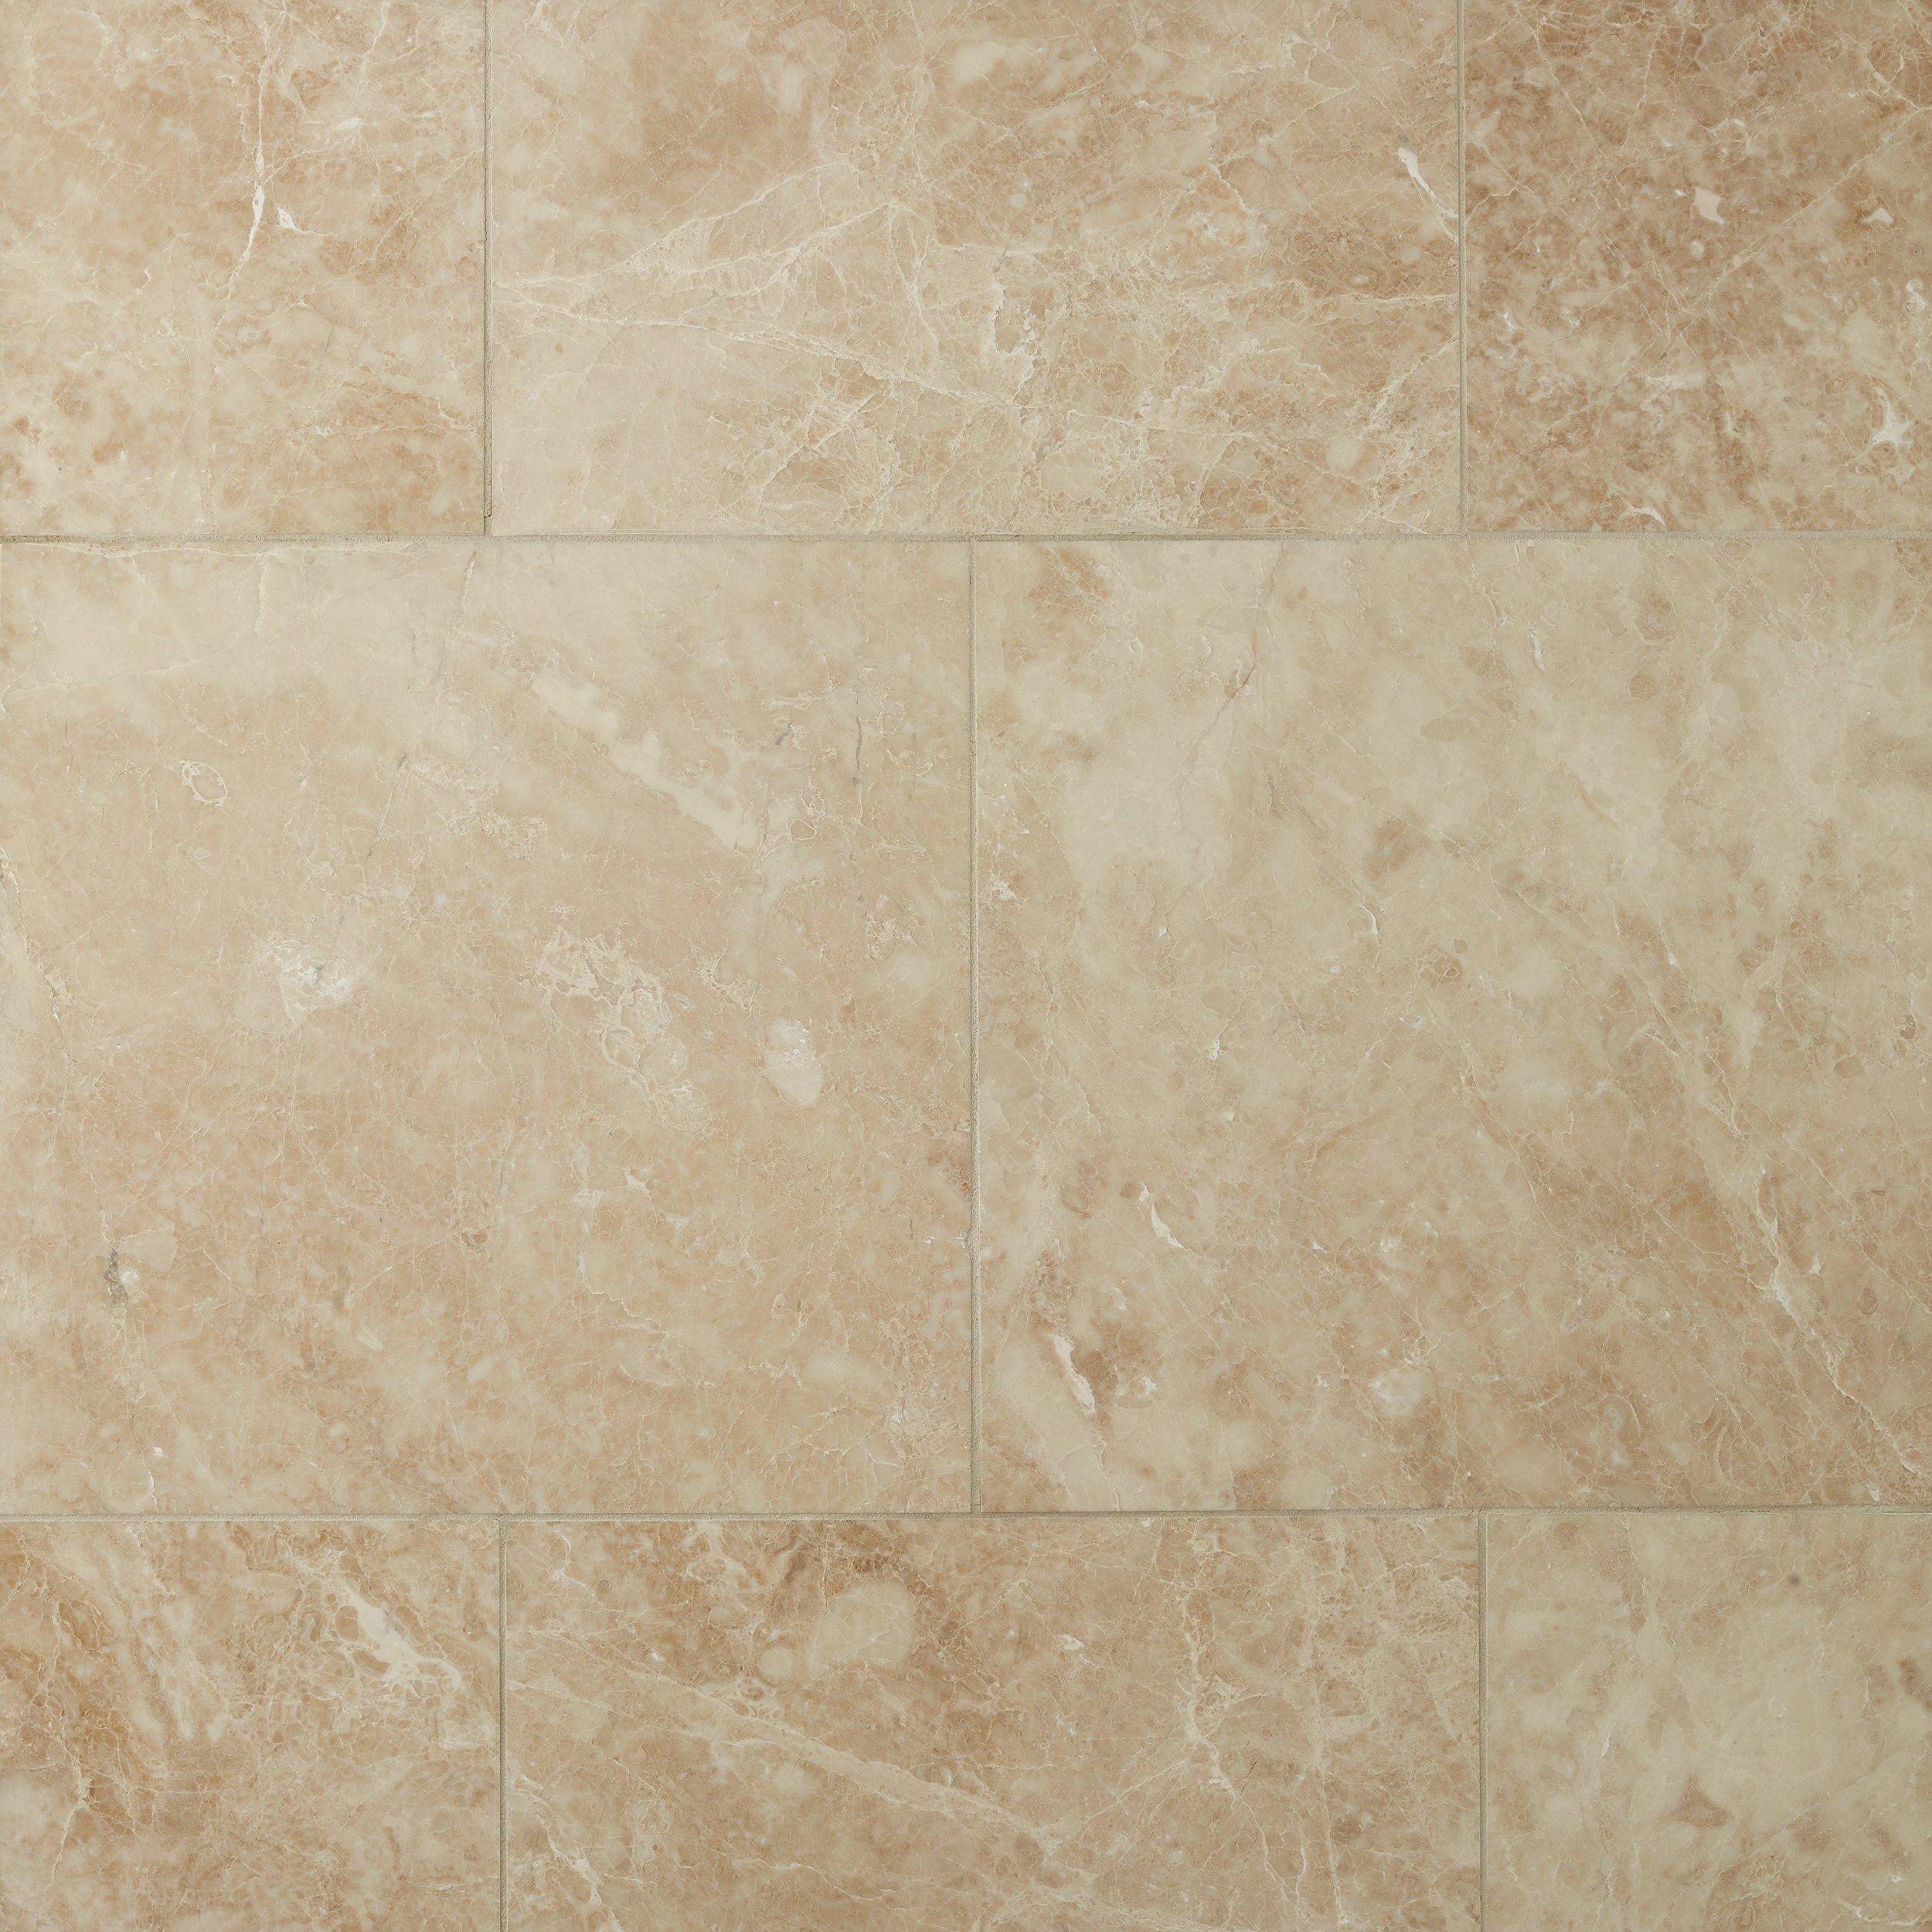 Cappuccino Polished Marble Tile